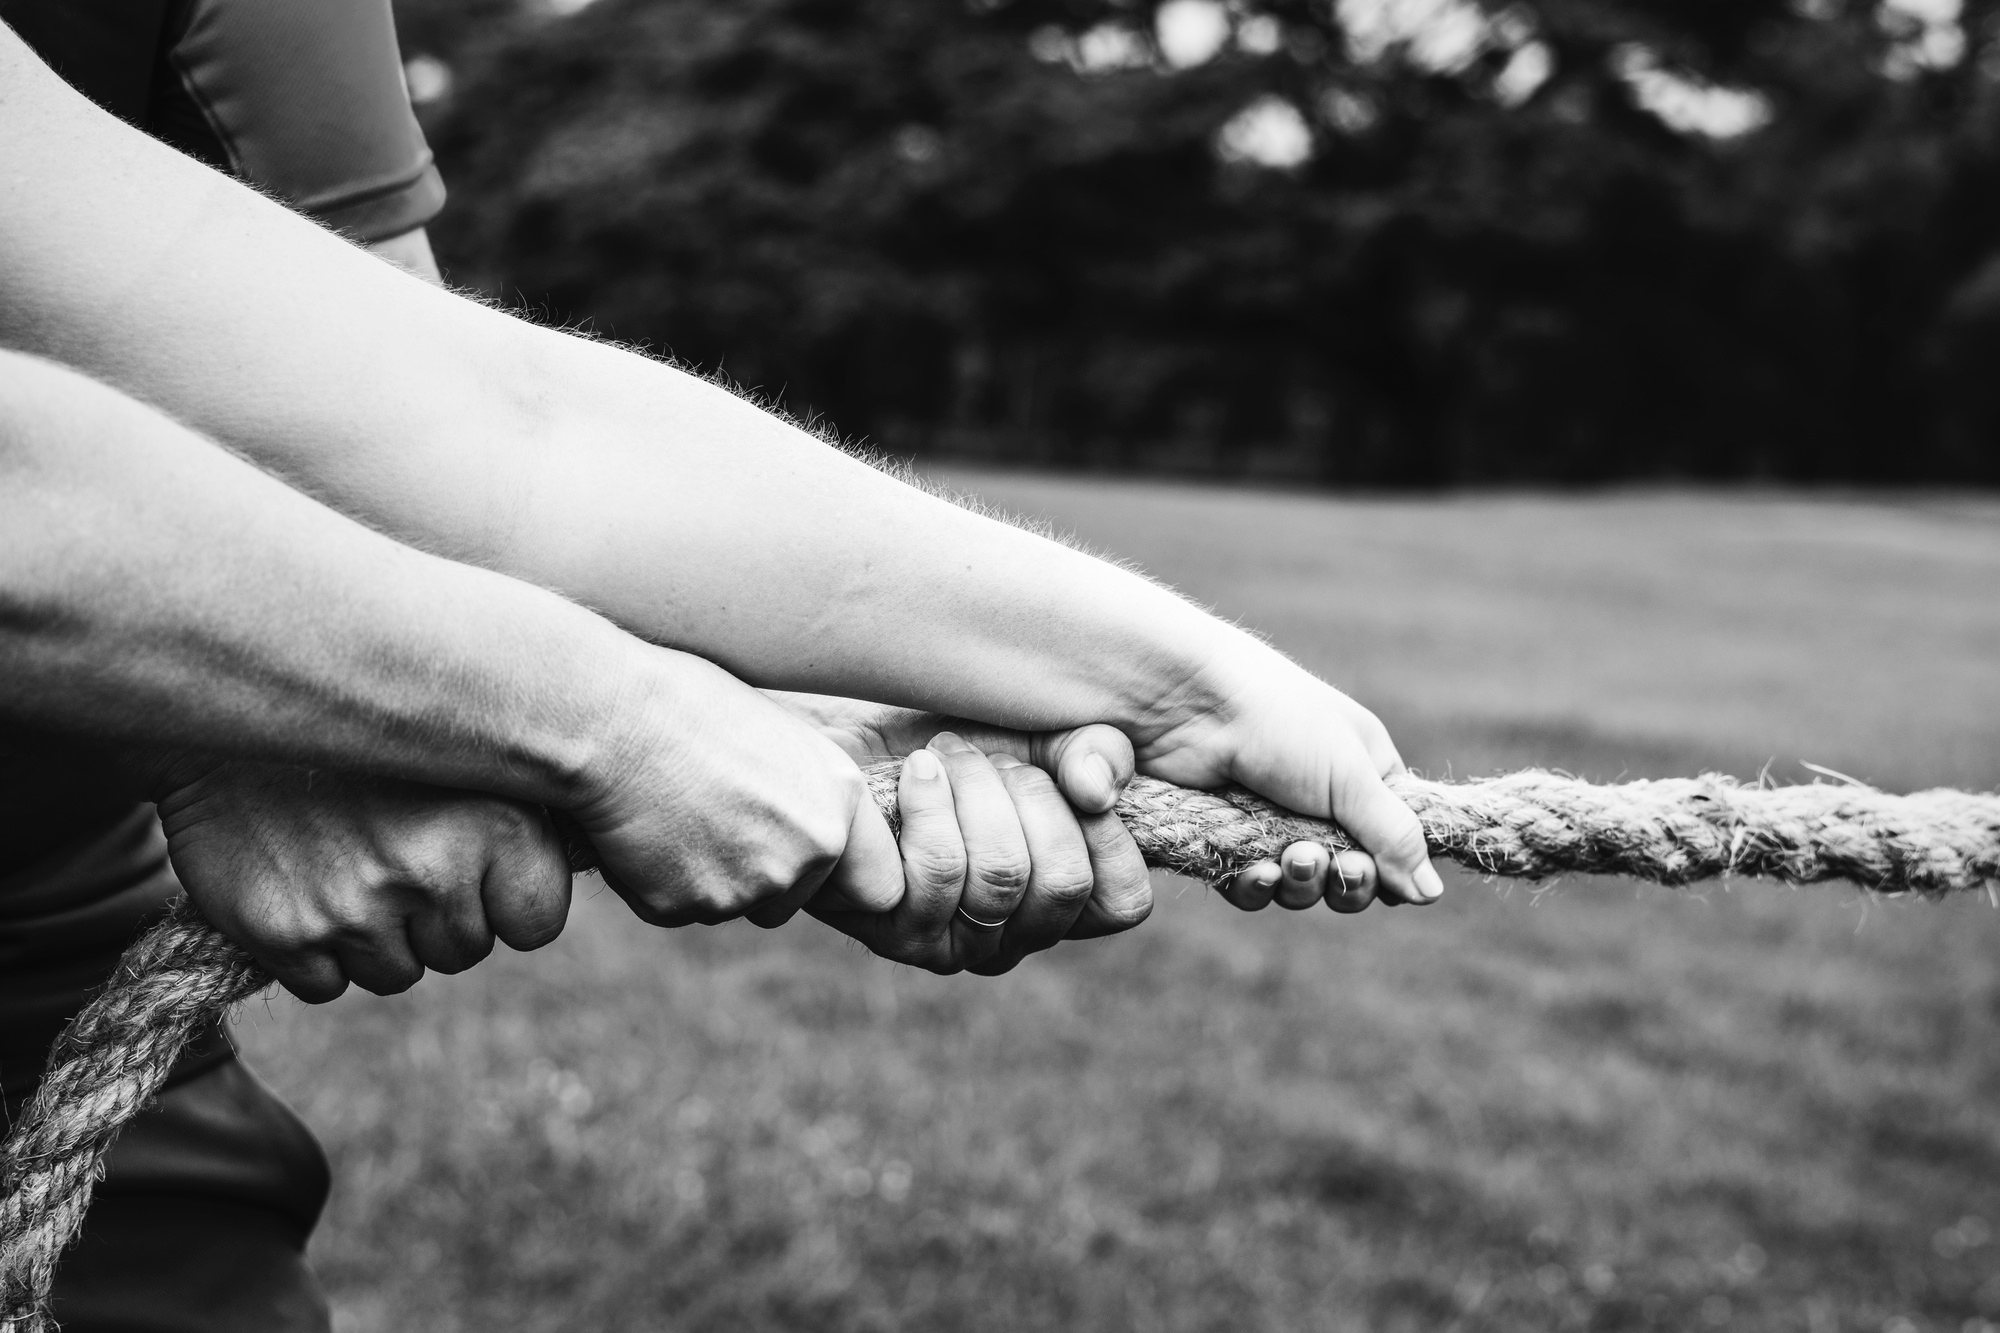 hands pulling a rope in a tug of war